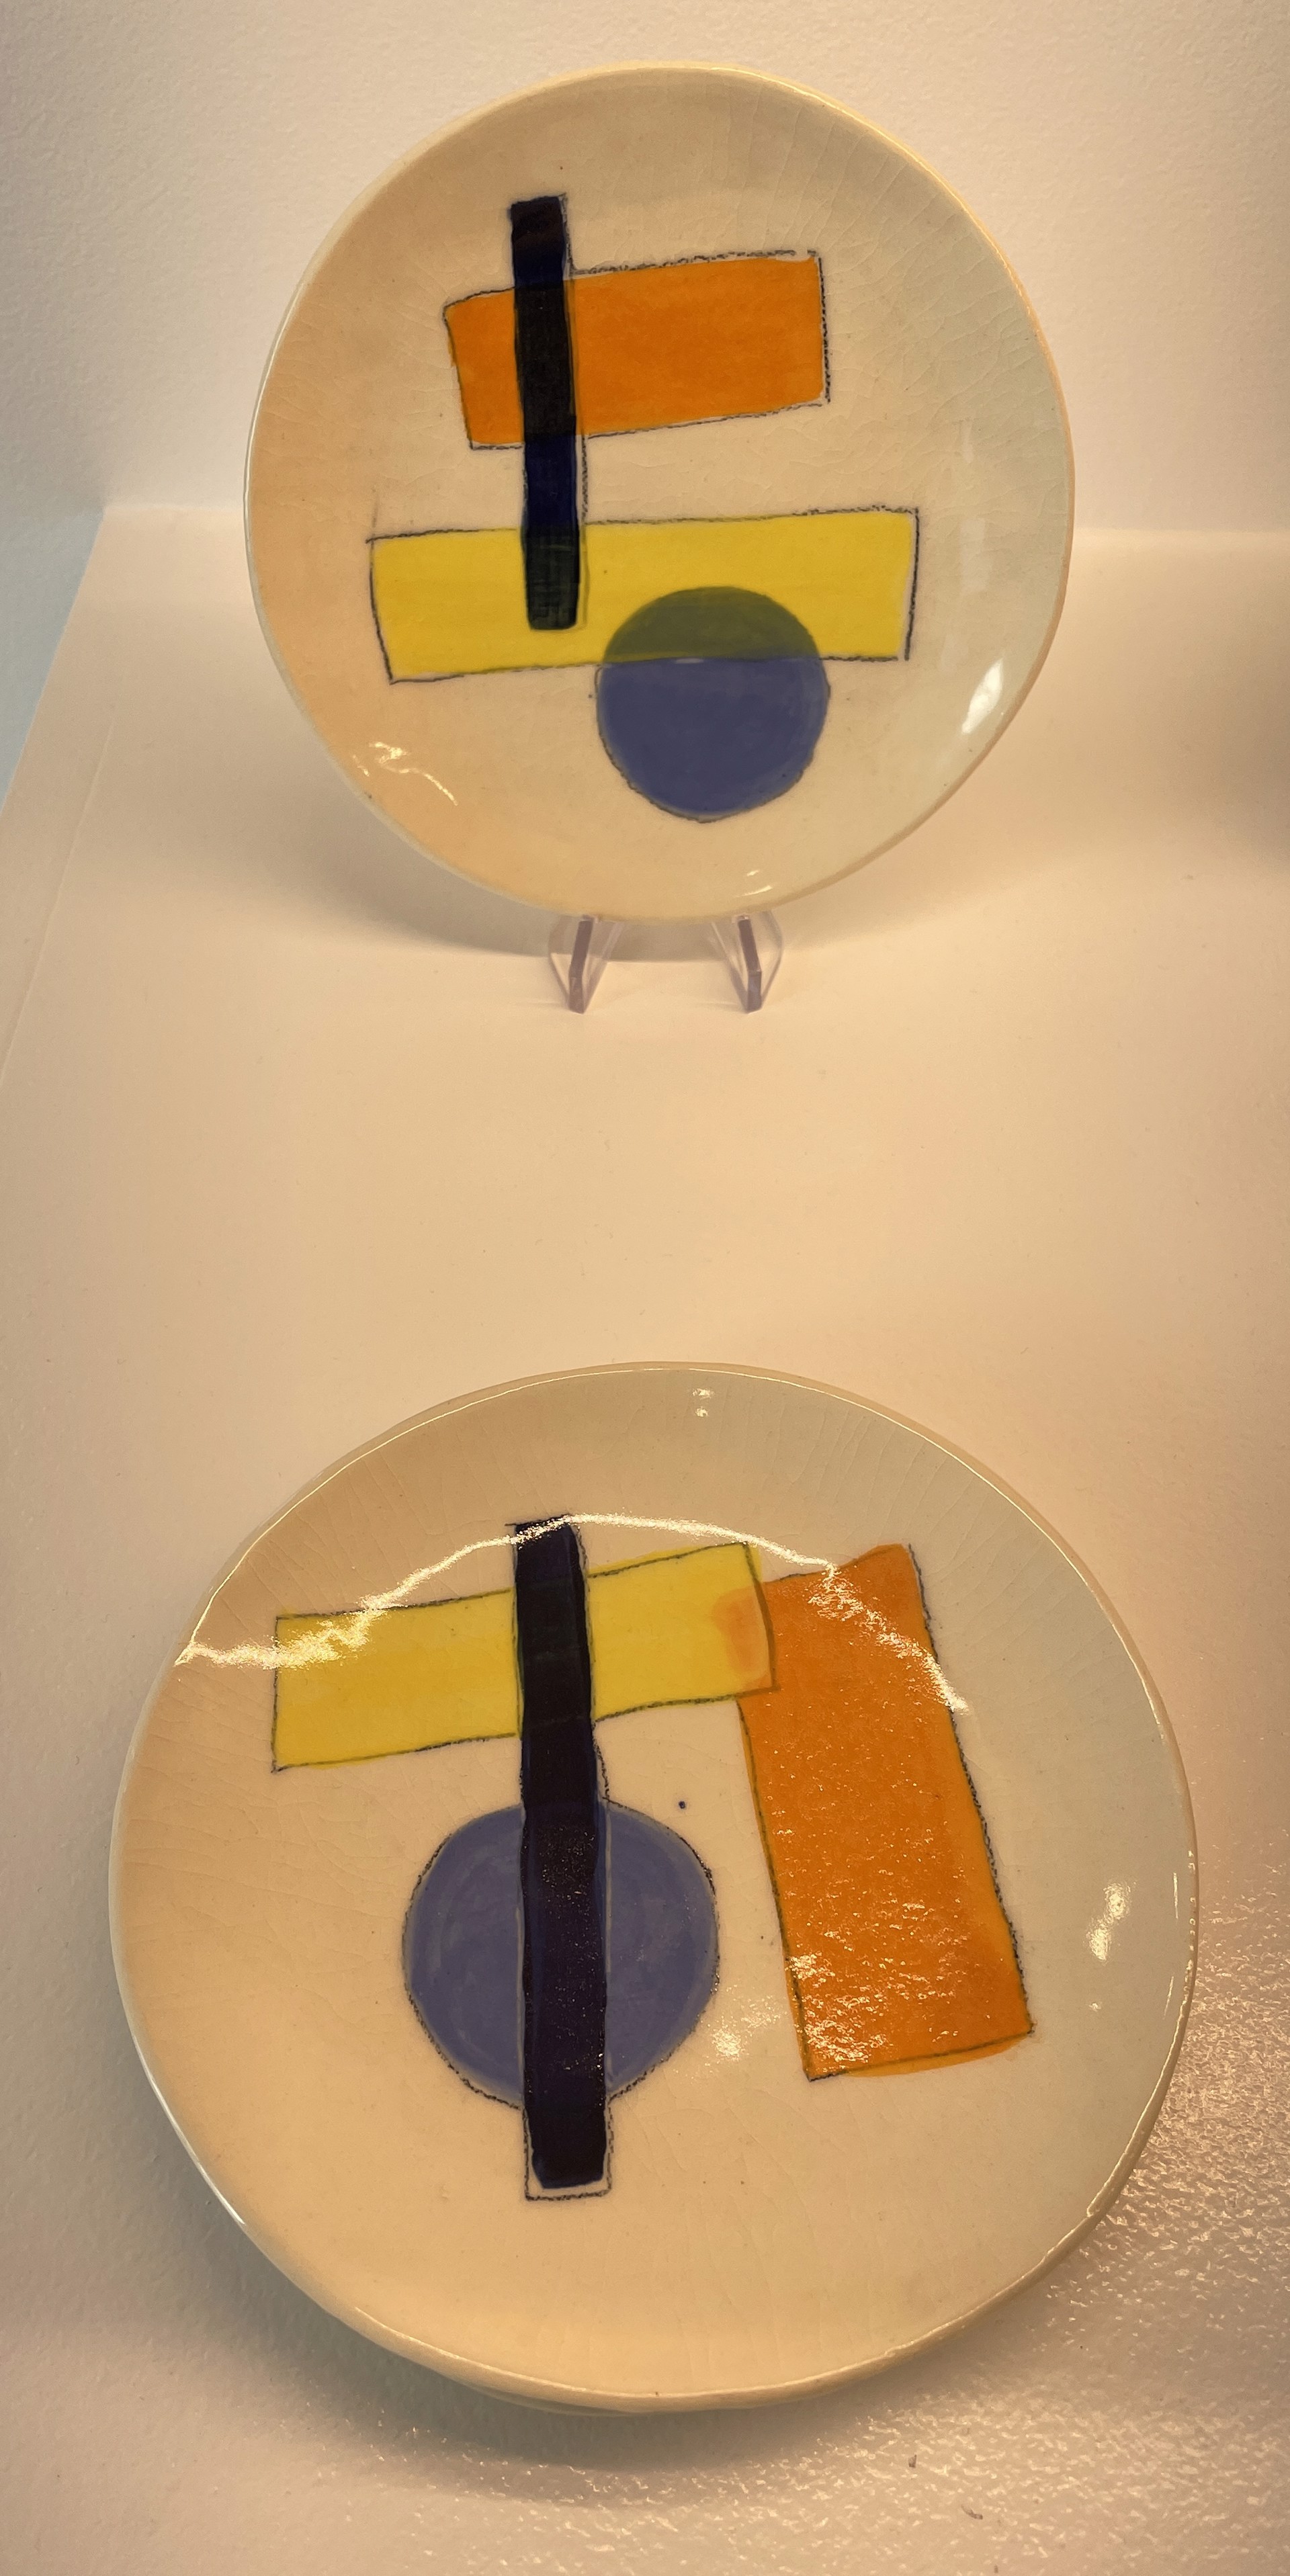 Plates Set of 4 by Jill Rothenberg-Simmons